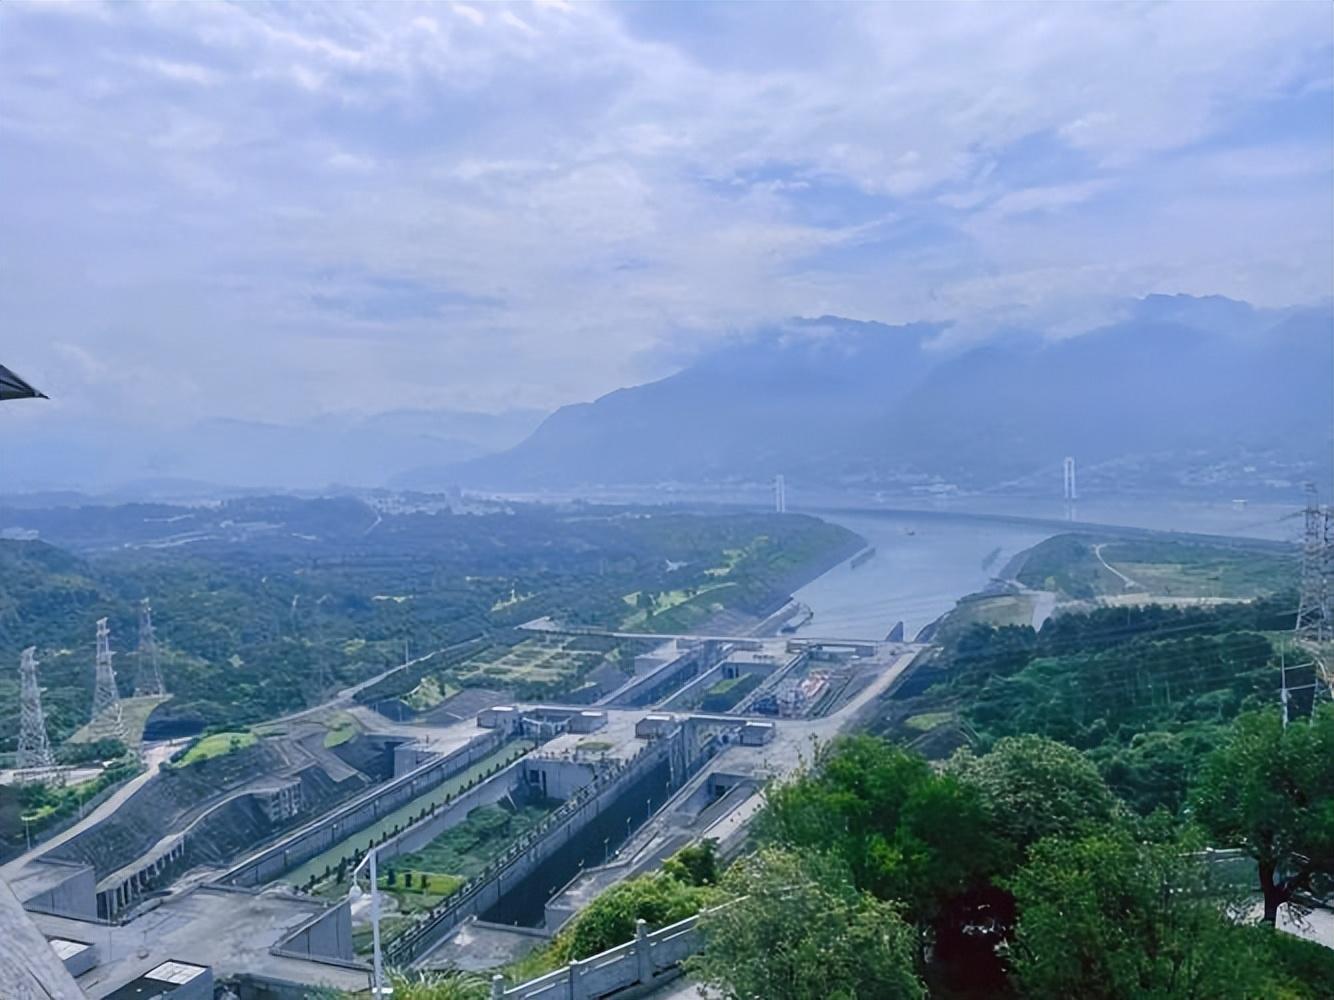 How many days will it take to open all the gates and let out the water in the Three Gorges Reservoir?